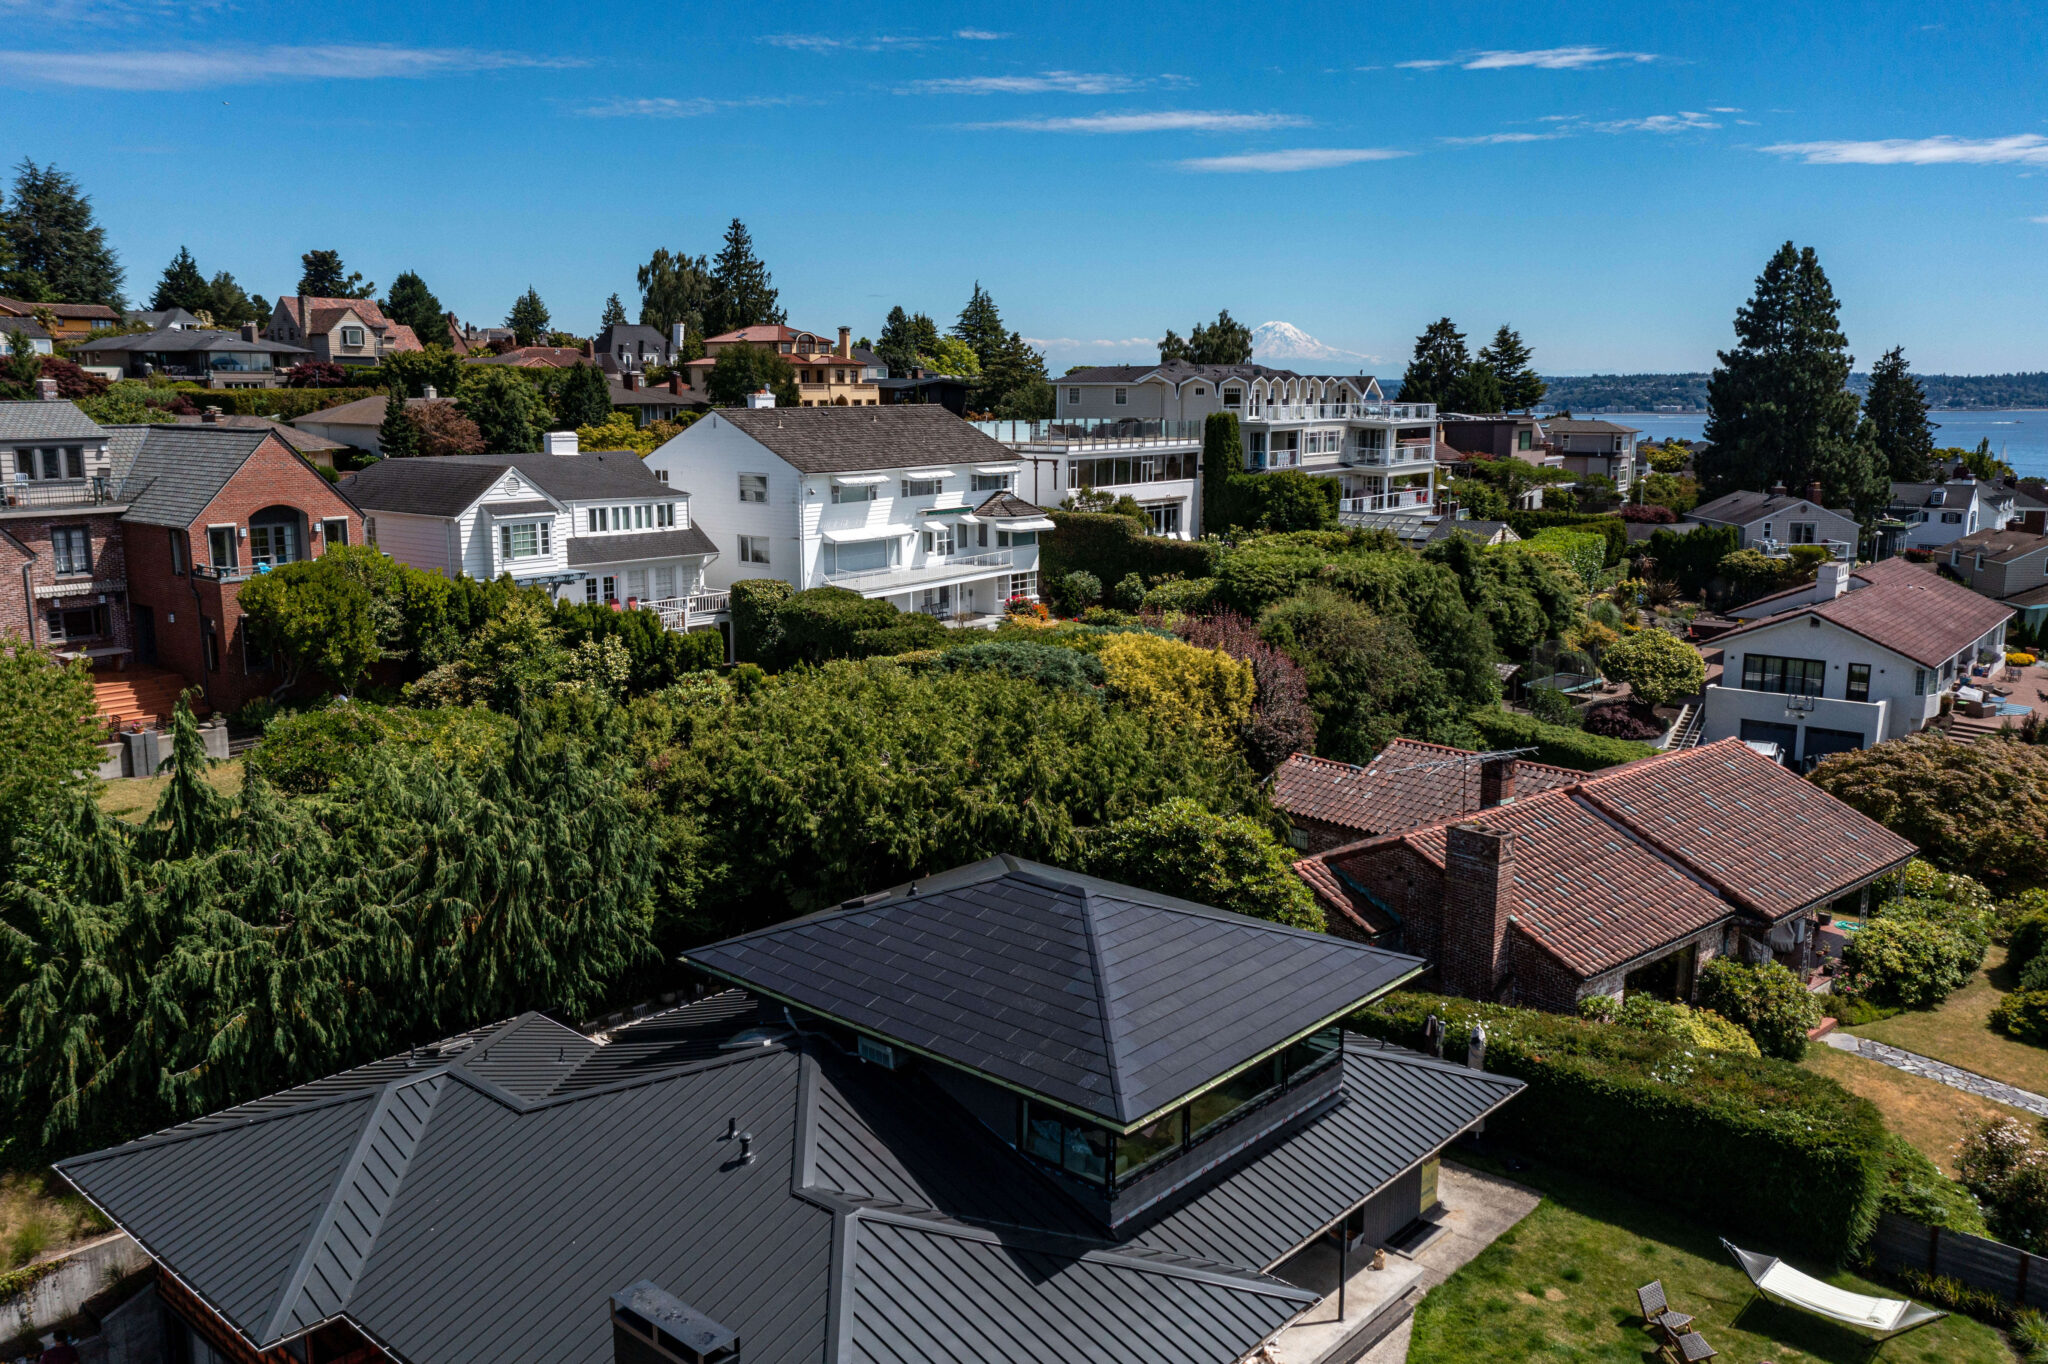 Tesla Solar Roof installation with Mt. Rainier in the background